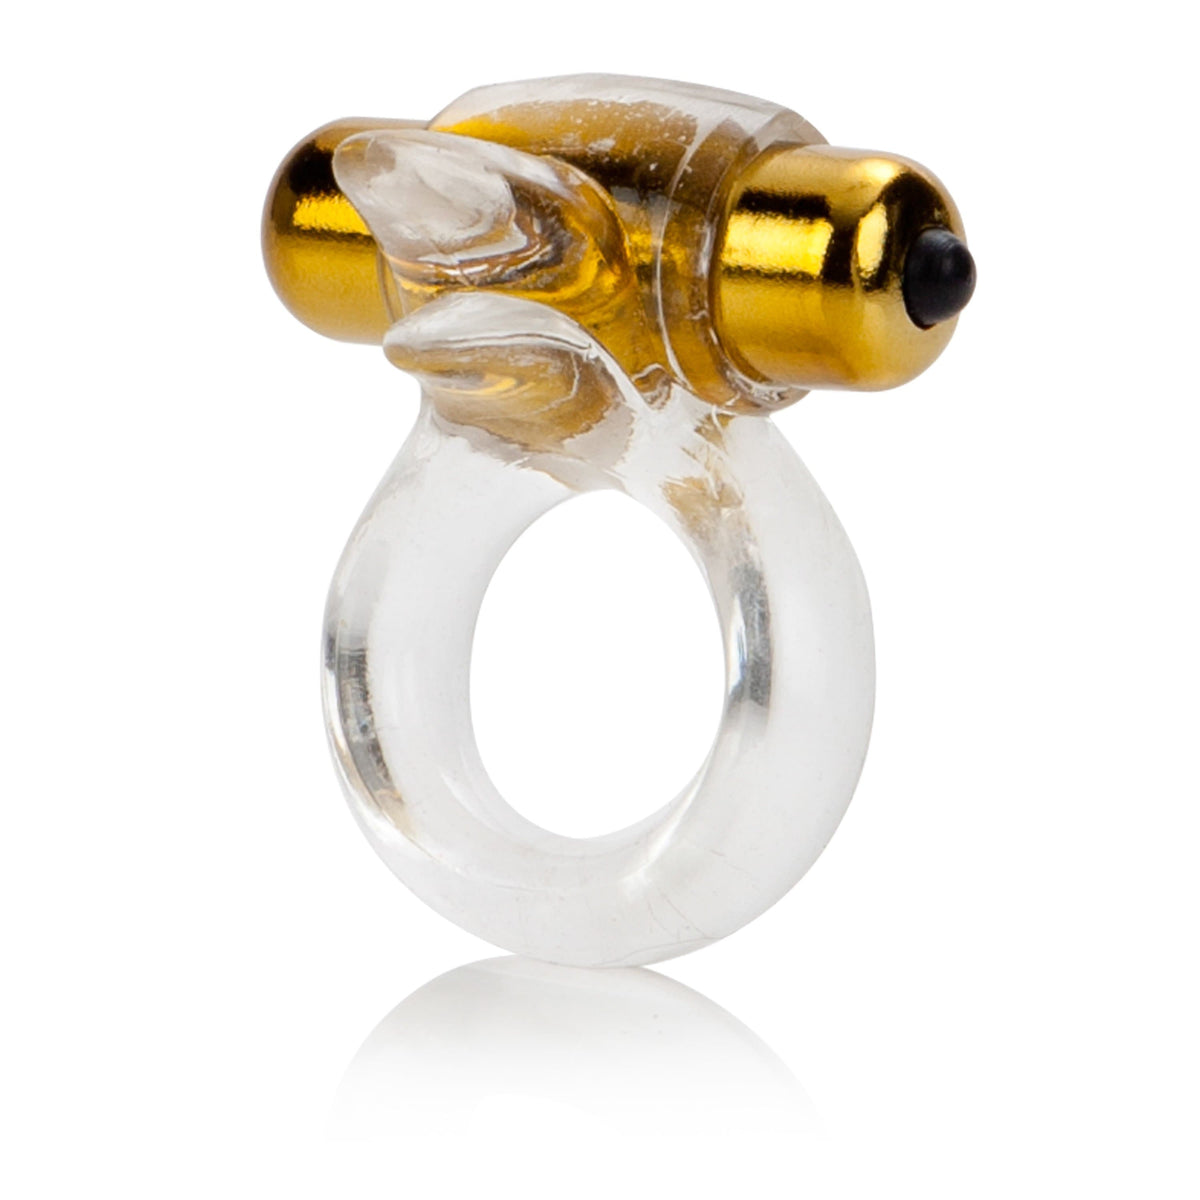 California Exotics - Pure Gold Double Trouble Enhancer Vibrating Cock Ring (Clear) CE1421 CherryAffairs